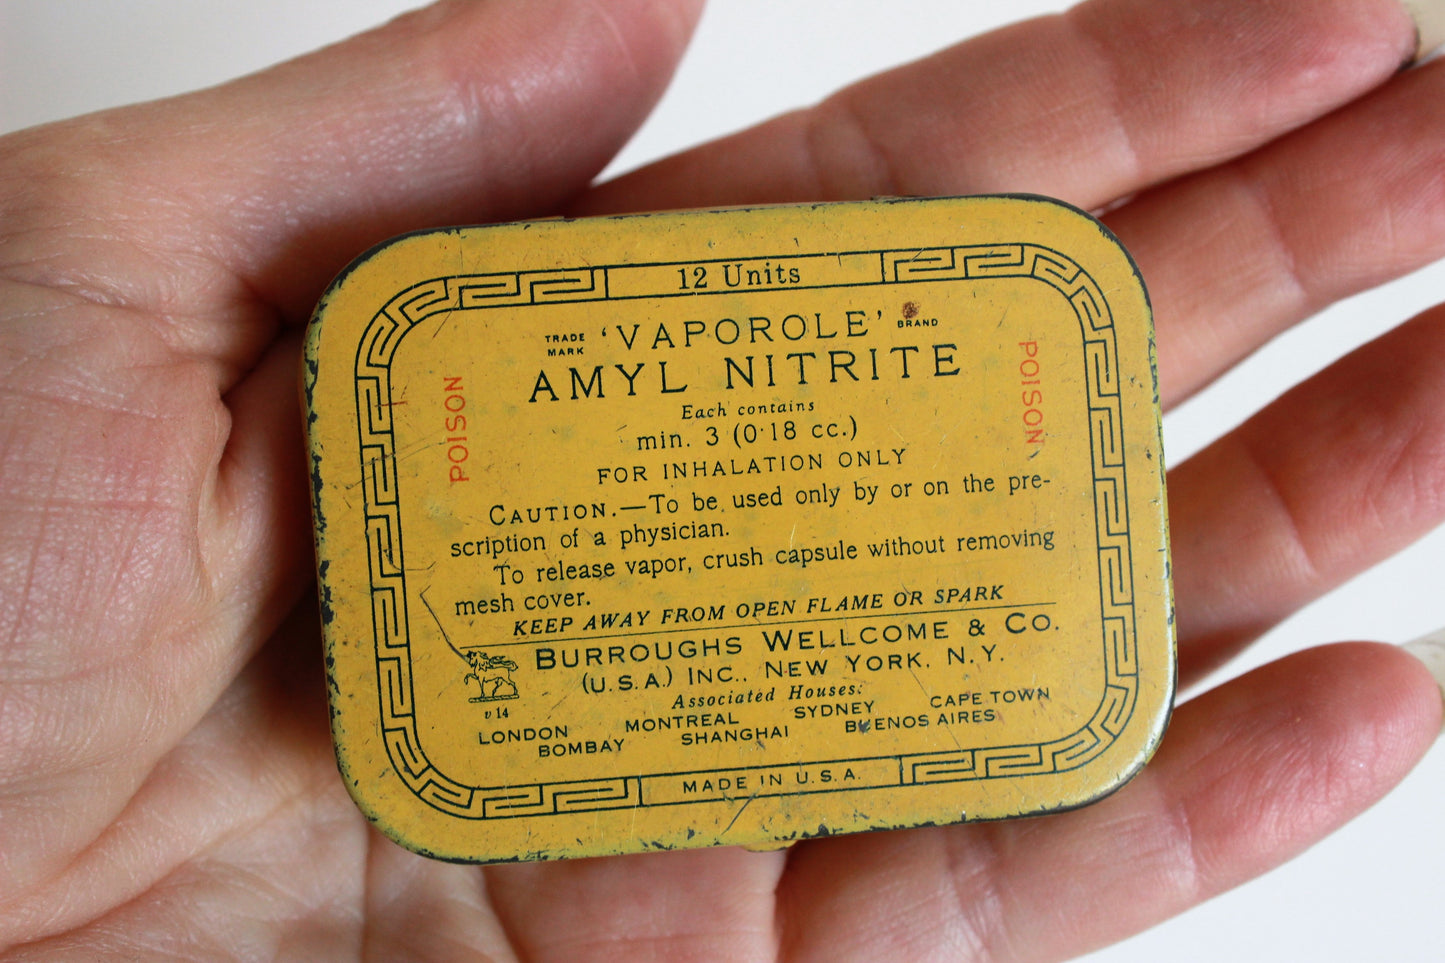 Vintage 1930s Tin, Vaporole Amyl Nitrate Tablets by Burroughs Wellcome